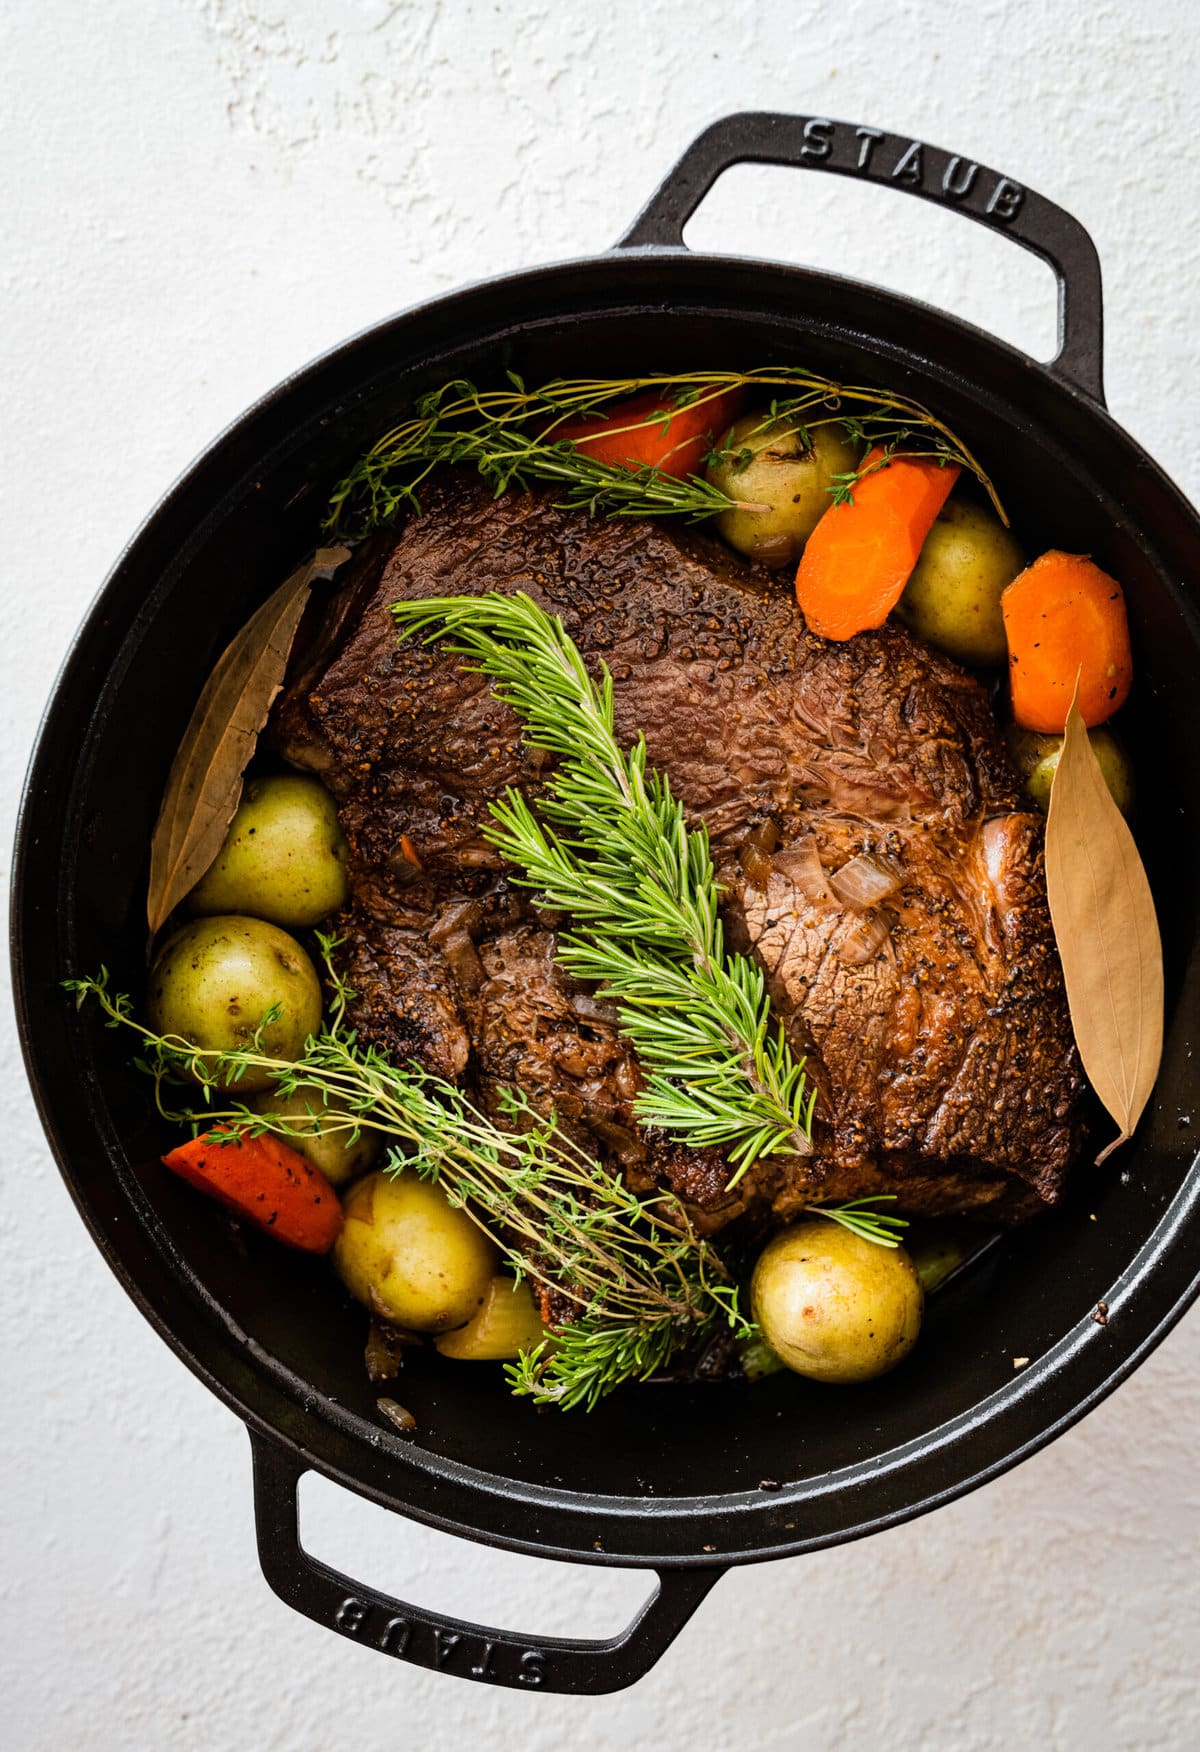 How to make the best perfect pot roast: add meat and herbs to the pot with vegetables.